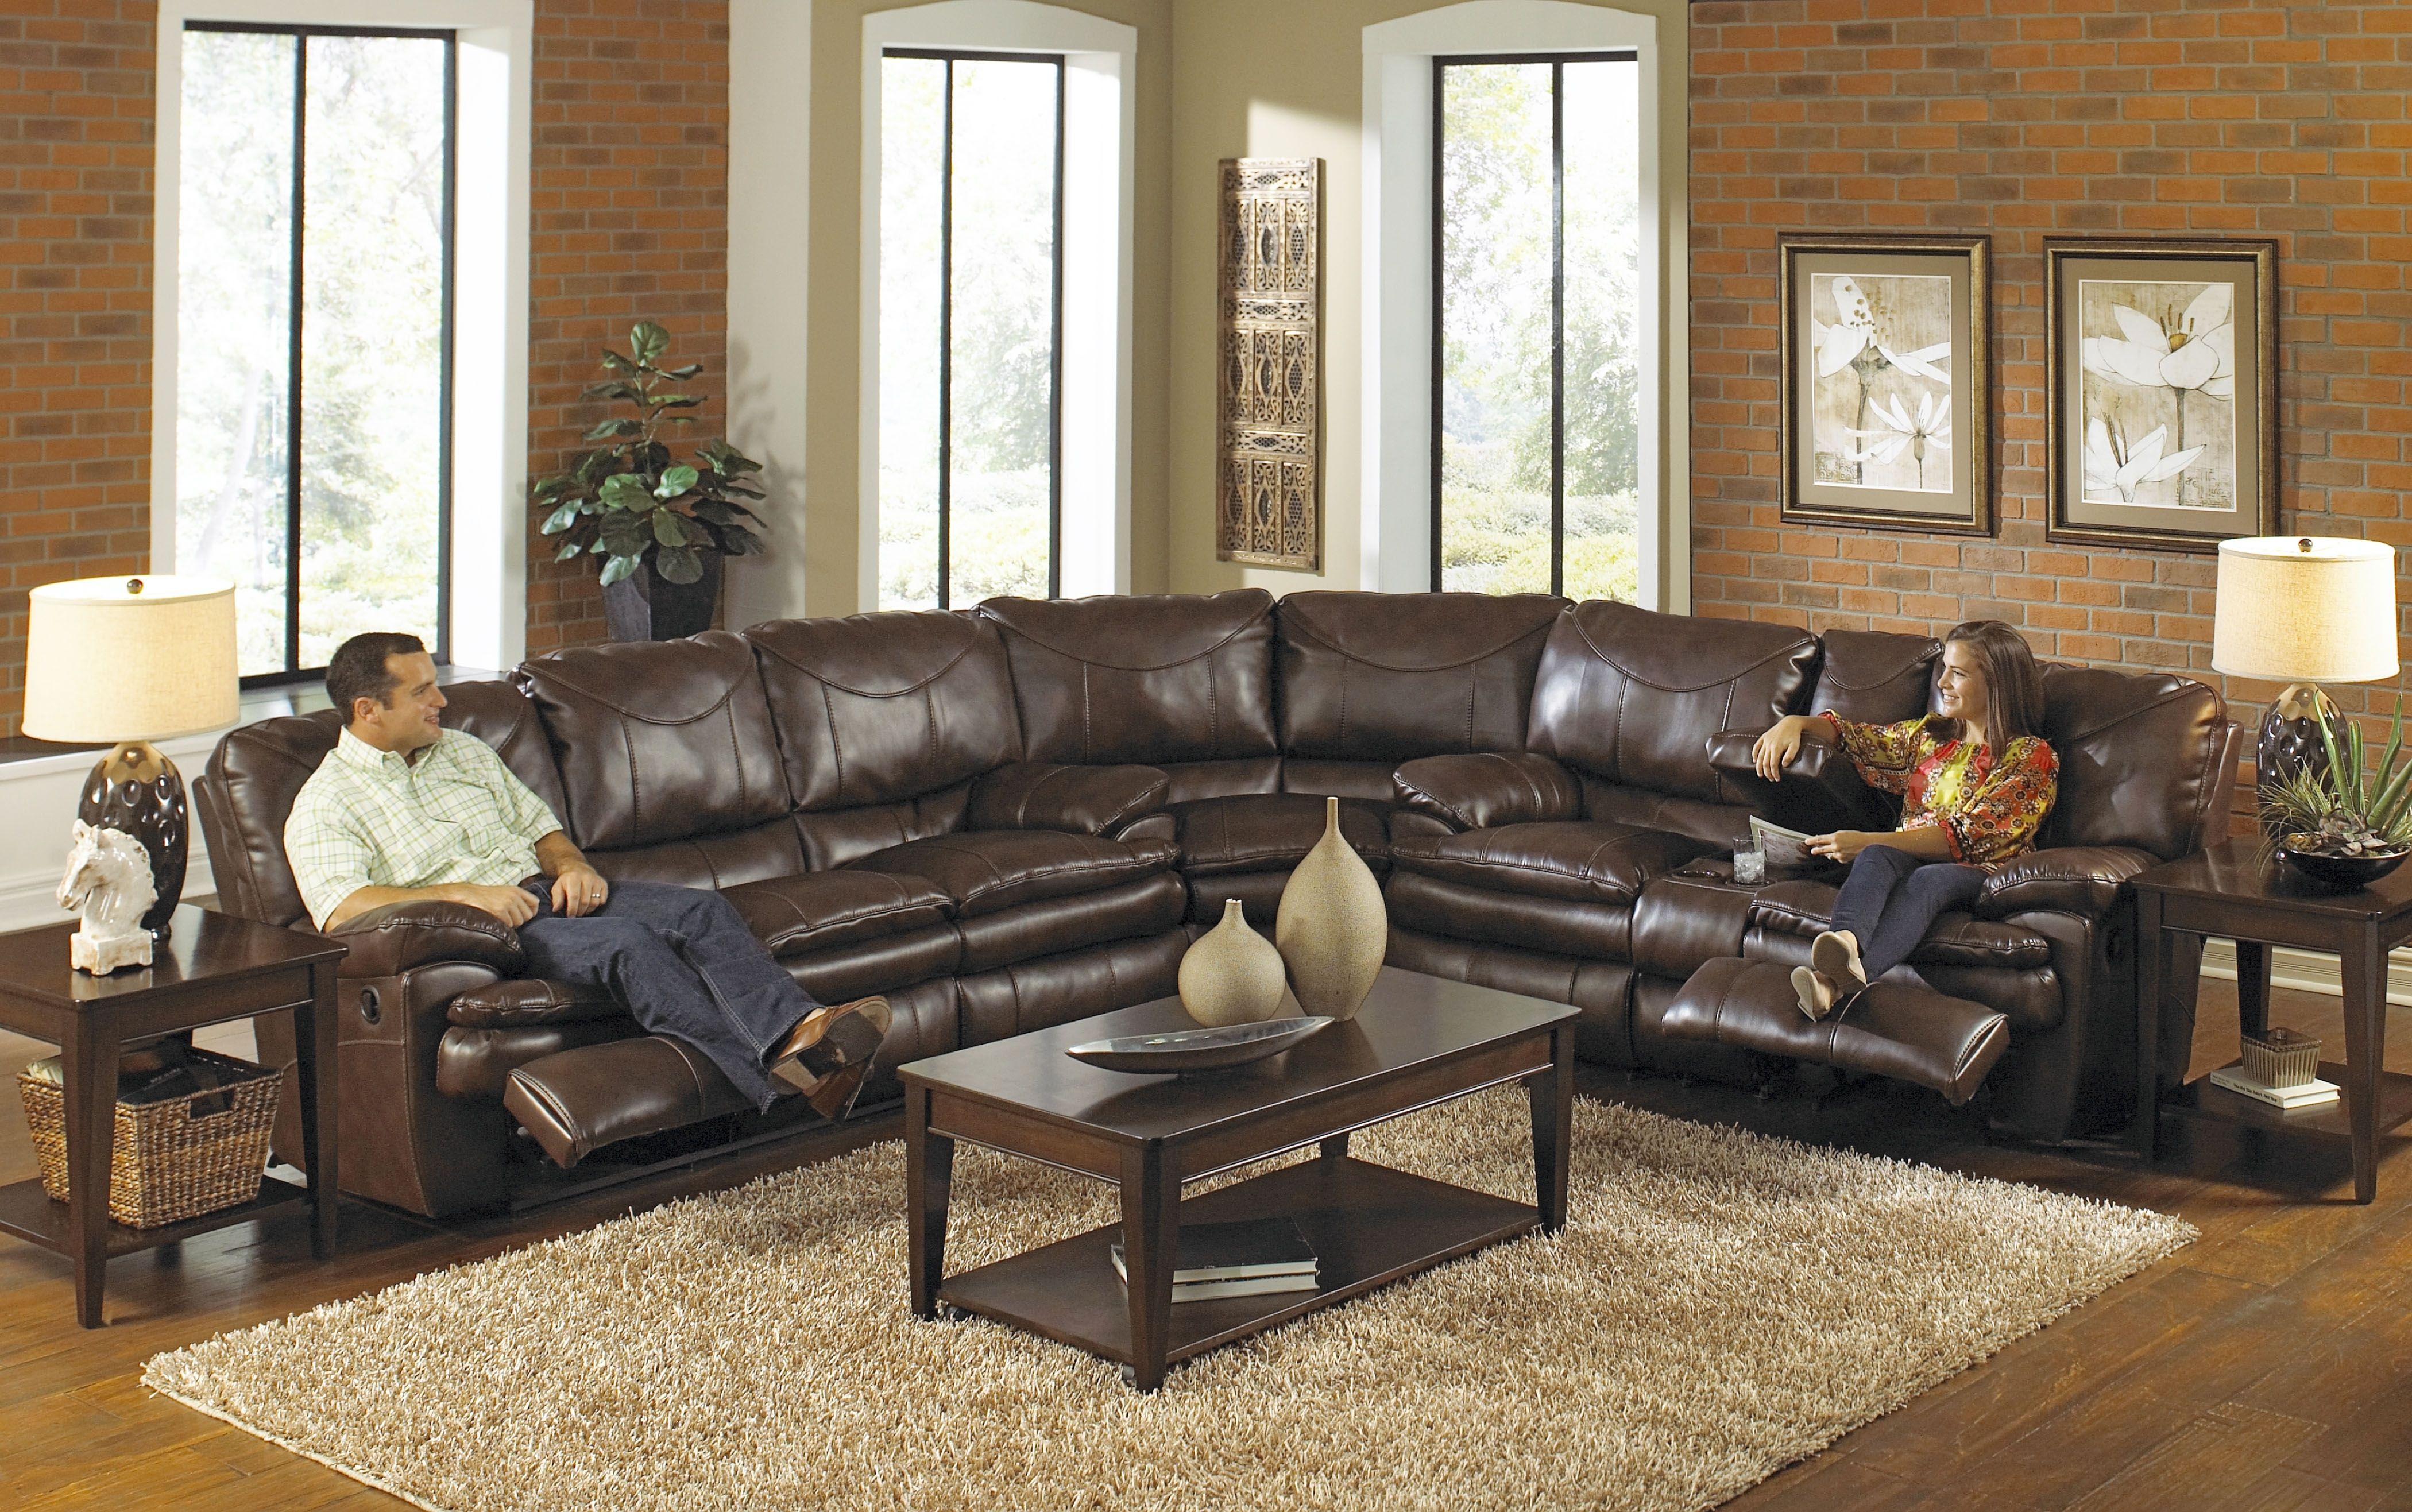 Epic Leather Sectional Sofa With Recliner 68 In Sofas And Couches Regarding Sectional Sofas With Recliners Leather (Photo 1 of 10)